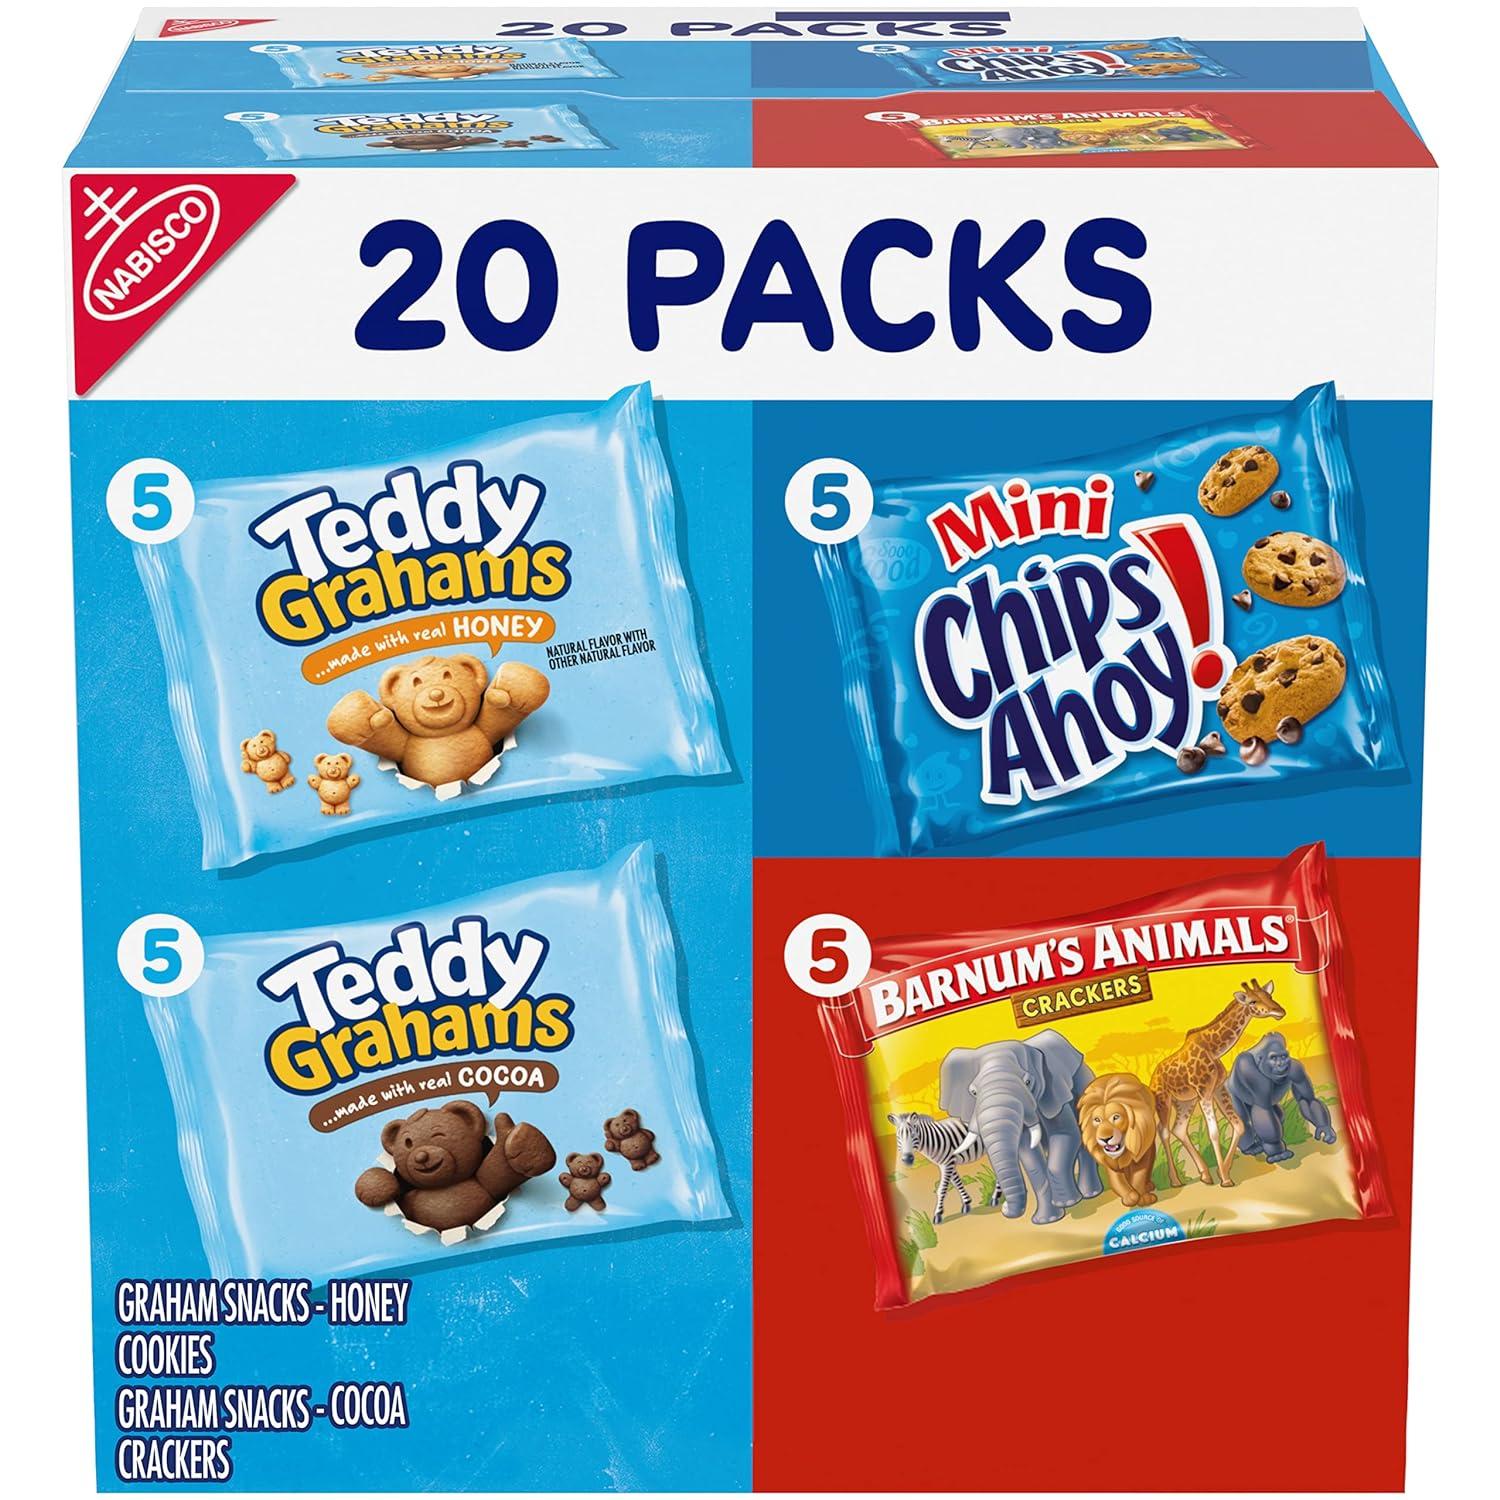 Barnums Animal Crackers Teddy Grahams and Chips Ahoy 20 Pack for $5.73